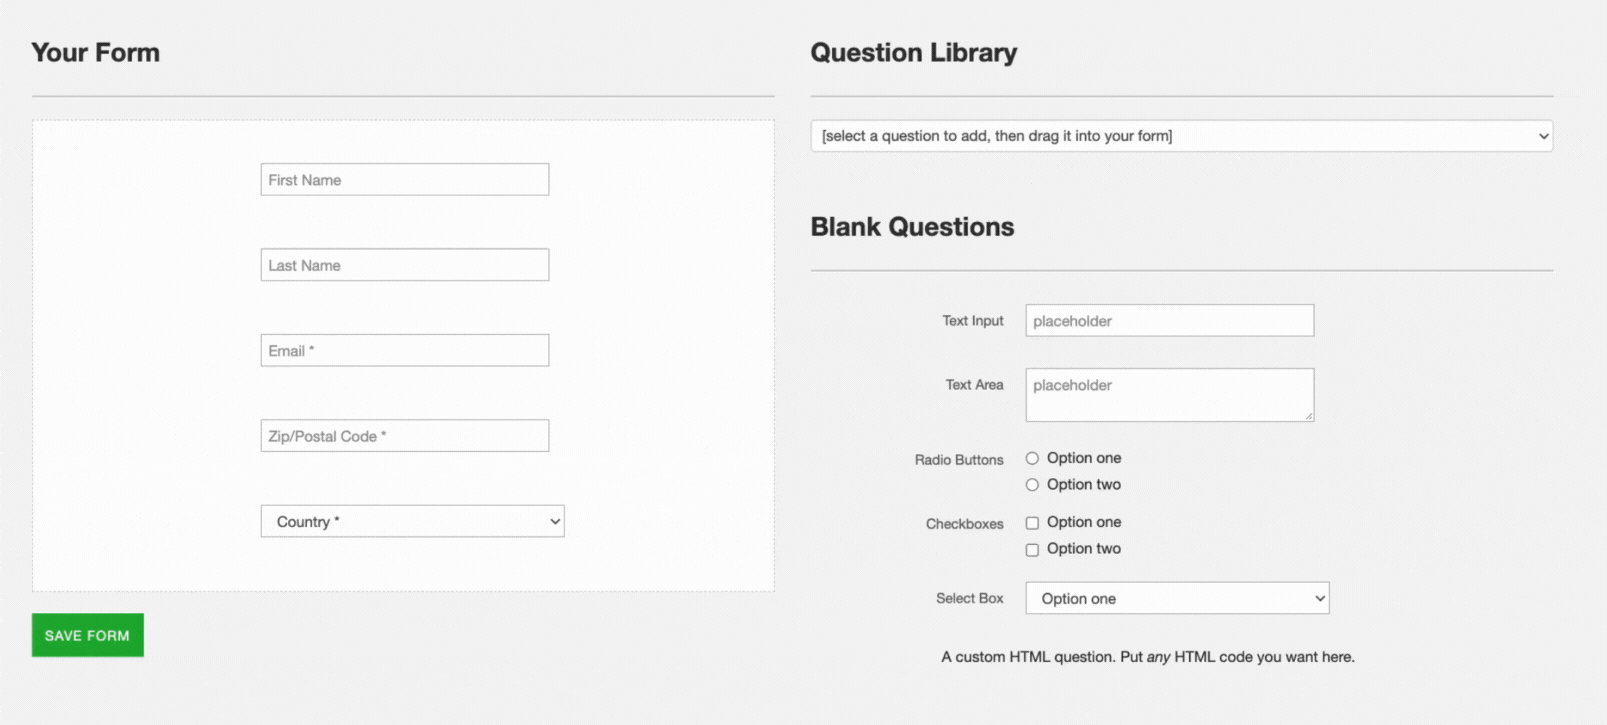 An animated GIF showing a Radio Button question being dragged into a form.